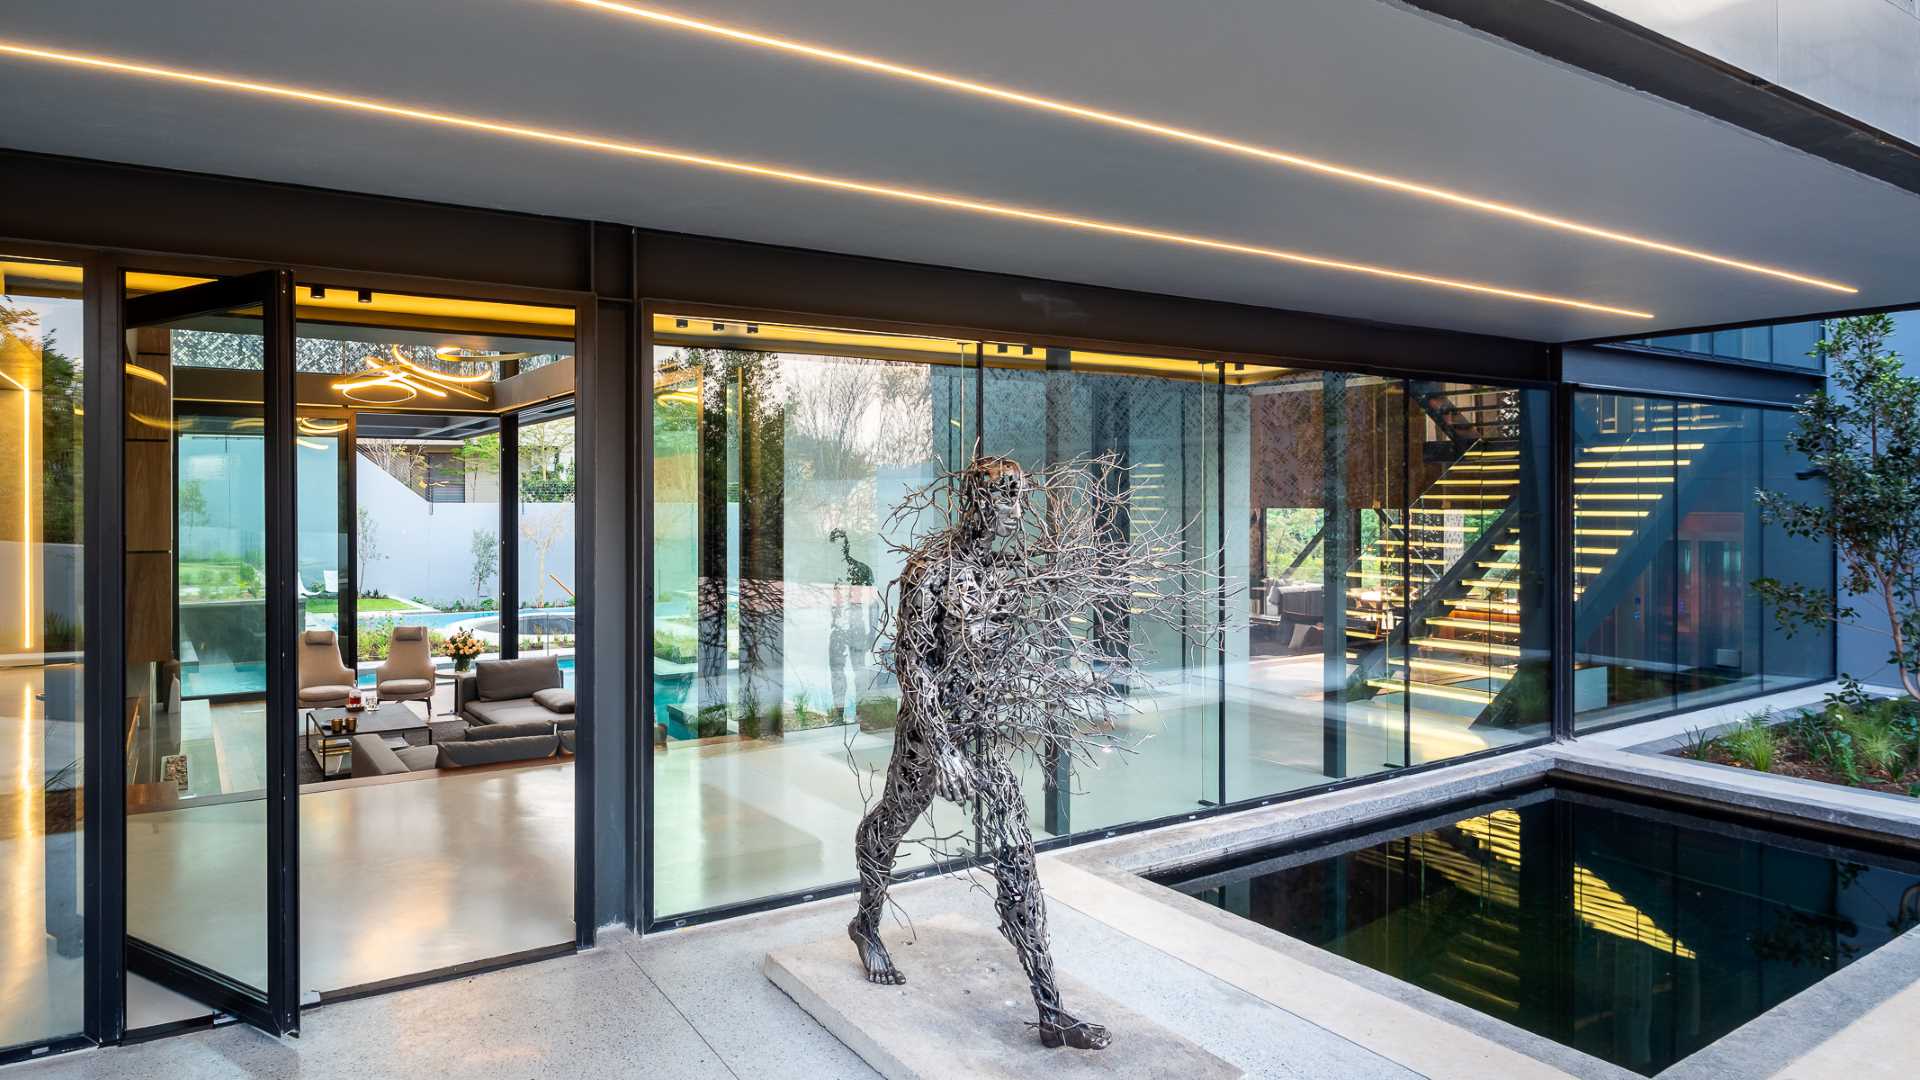 A modern glass entryway with a water feature and a metal sculpture.